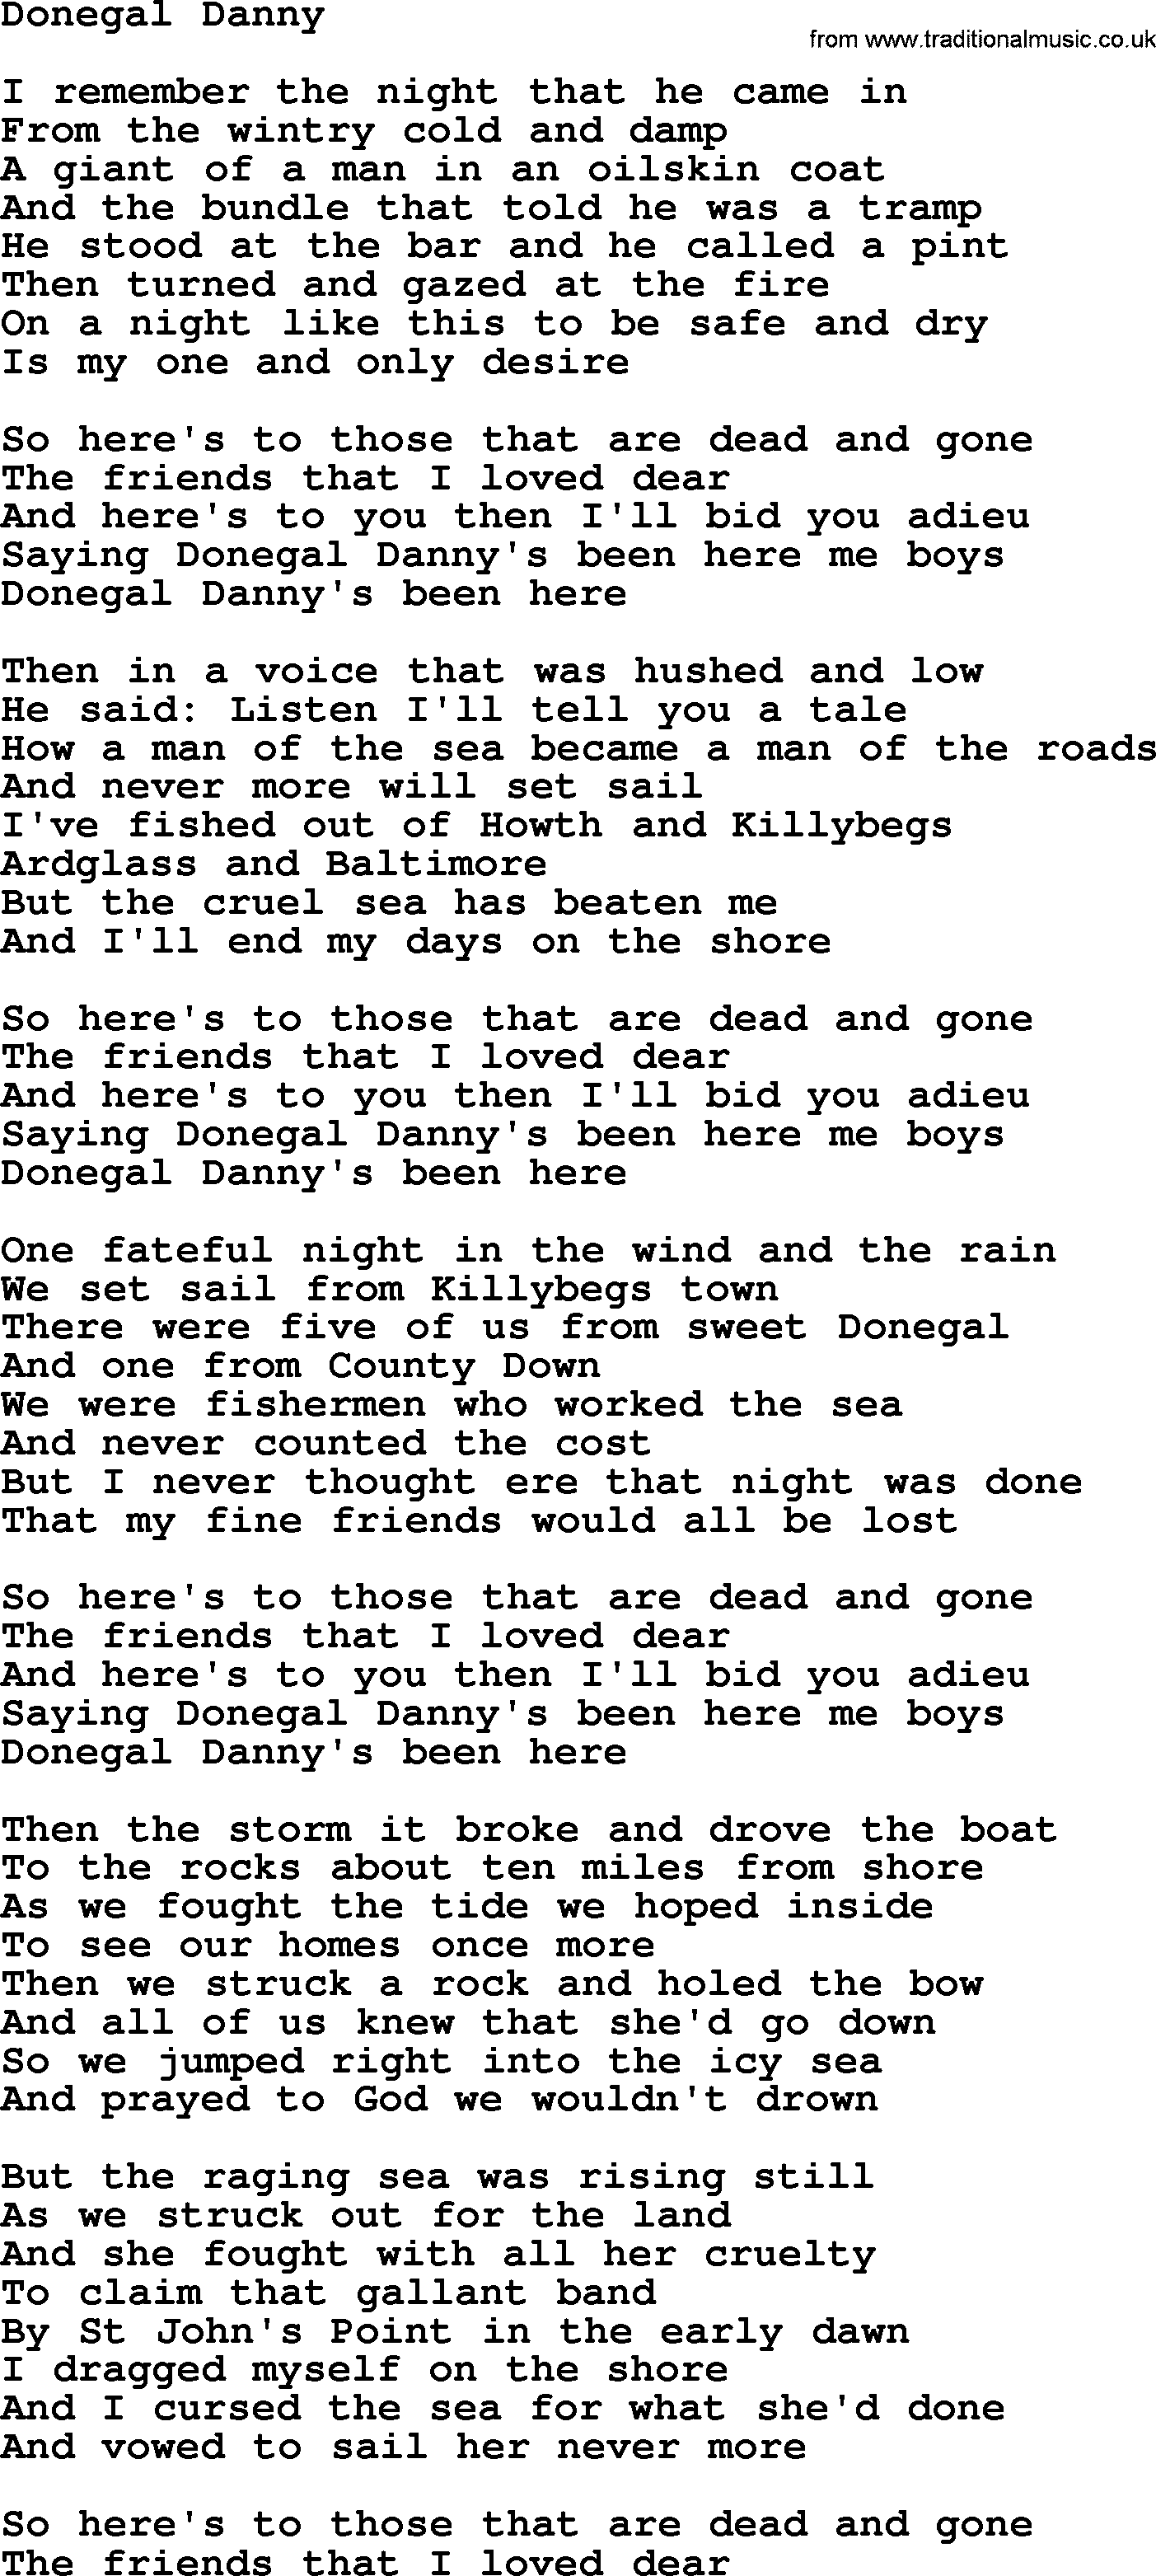 The Dubliners song: Donegal Danny, lyrics